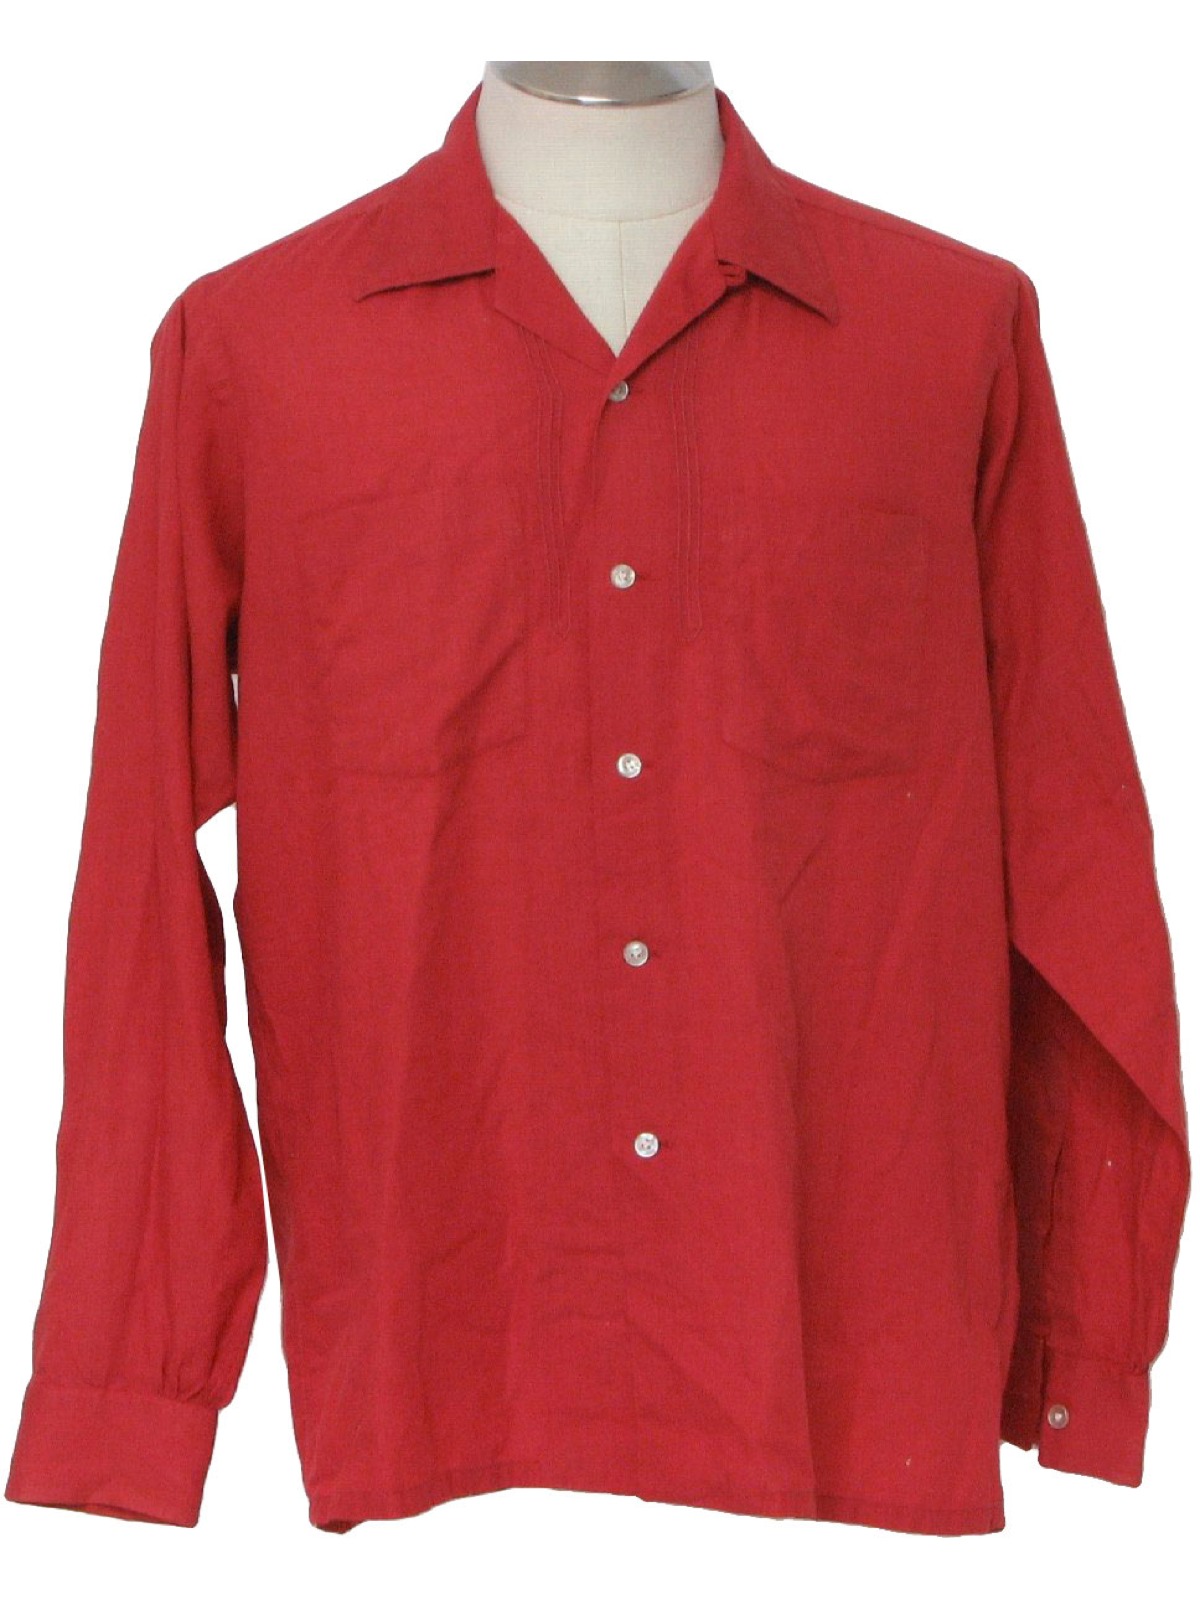 Retro 1970's Shirt (Hathaway) : 70s -Hathaway- Mens red polyester and ...